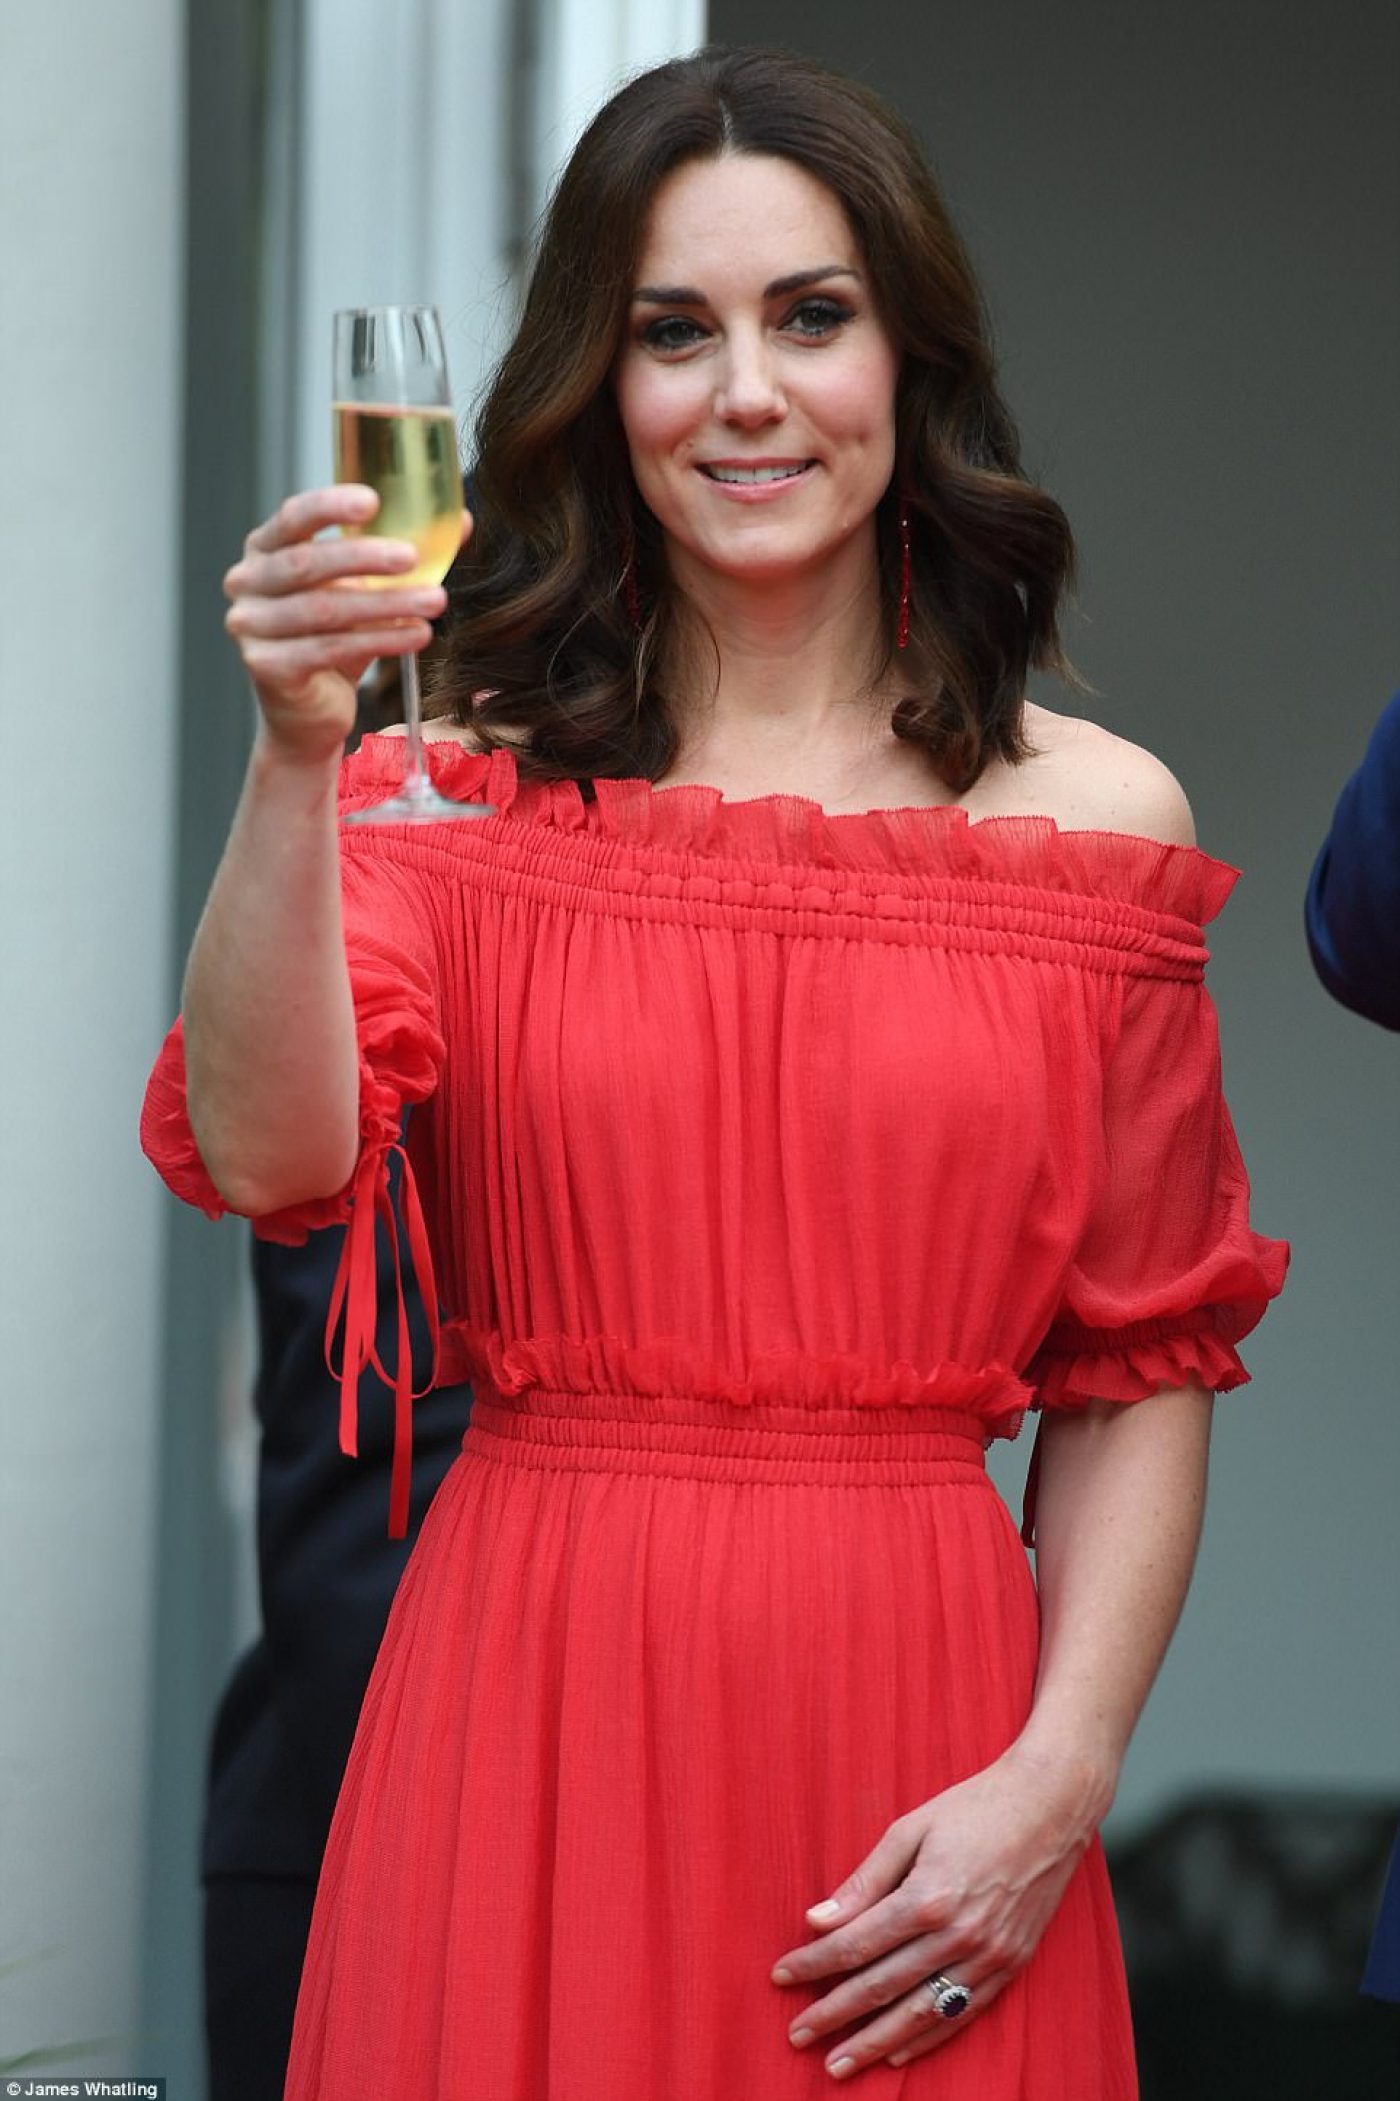 Kate Middleton Opts For Summer Glamour In This Red Off-the-Shoulder ...